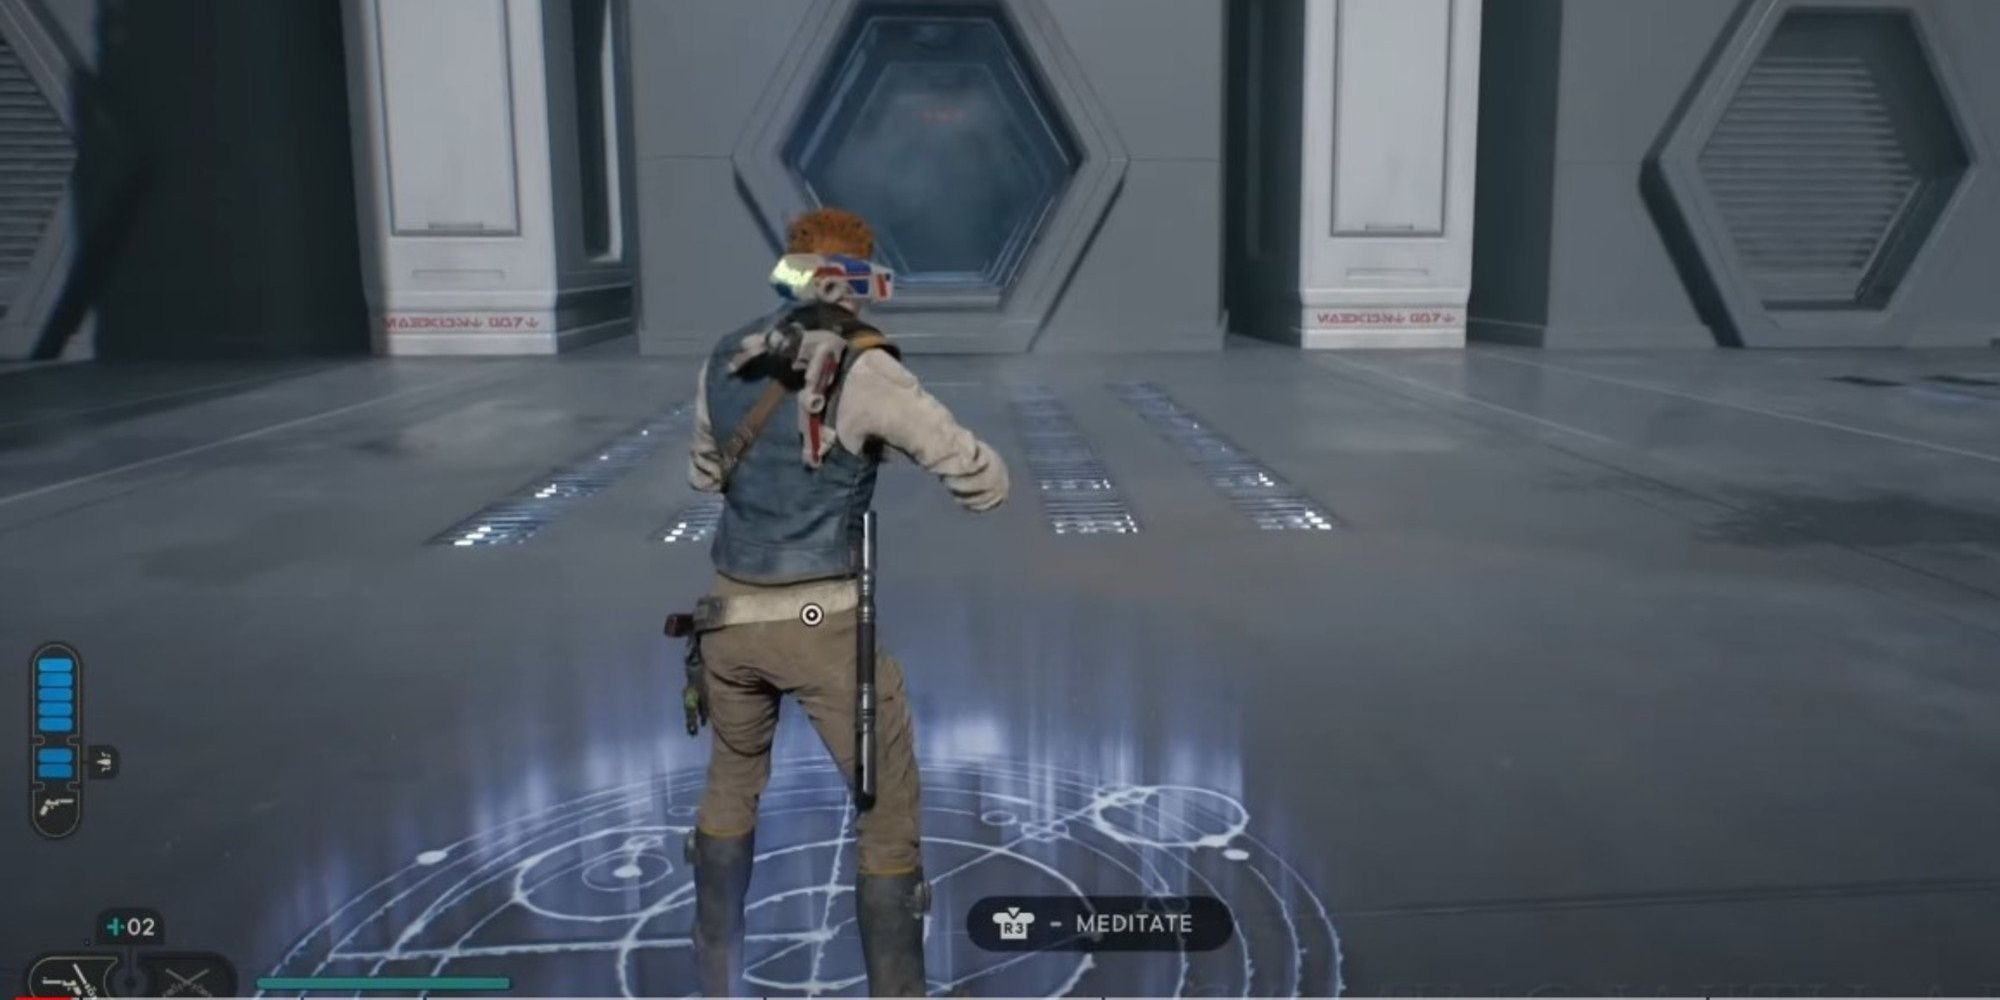 The character in Star Wars Jedi: Survivor is standing at the Meditation Spot in Hanger Bay Exterior and is about to run inside of Hangar Bay to retrieve the collectibles.